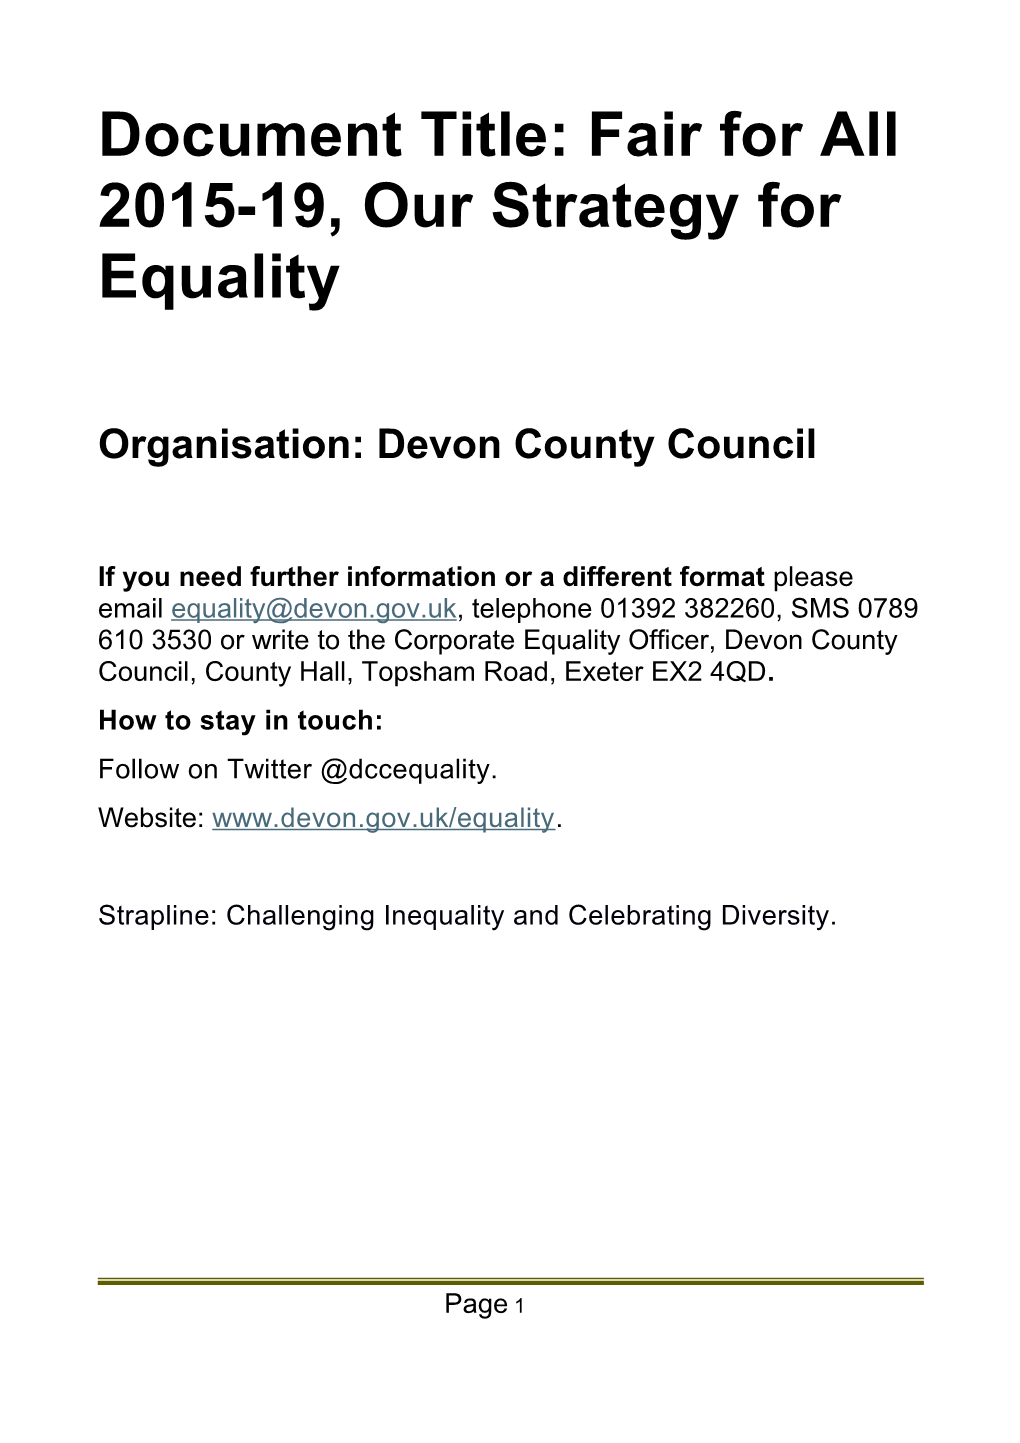 Document Title: Fair for All 2015-19, Our Strategy for Equality